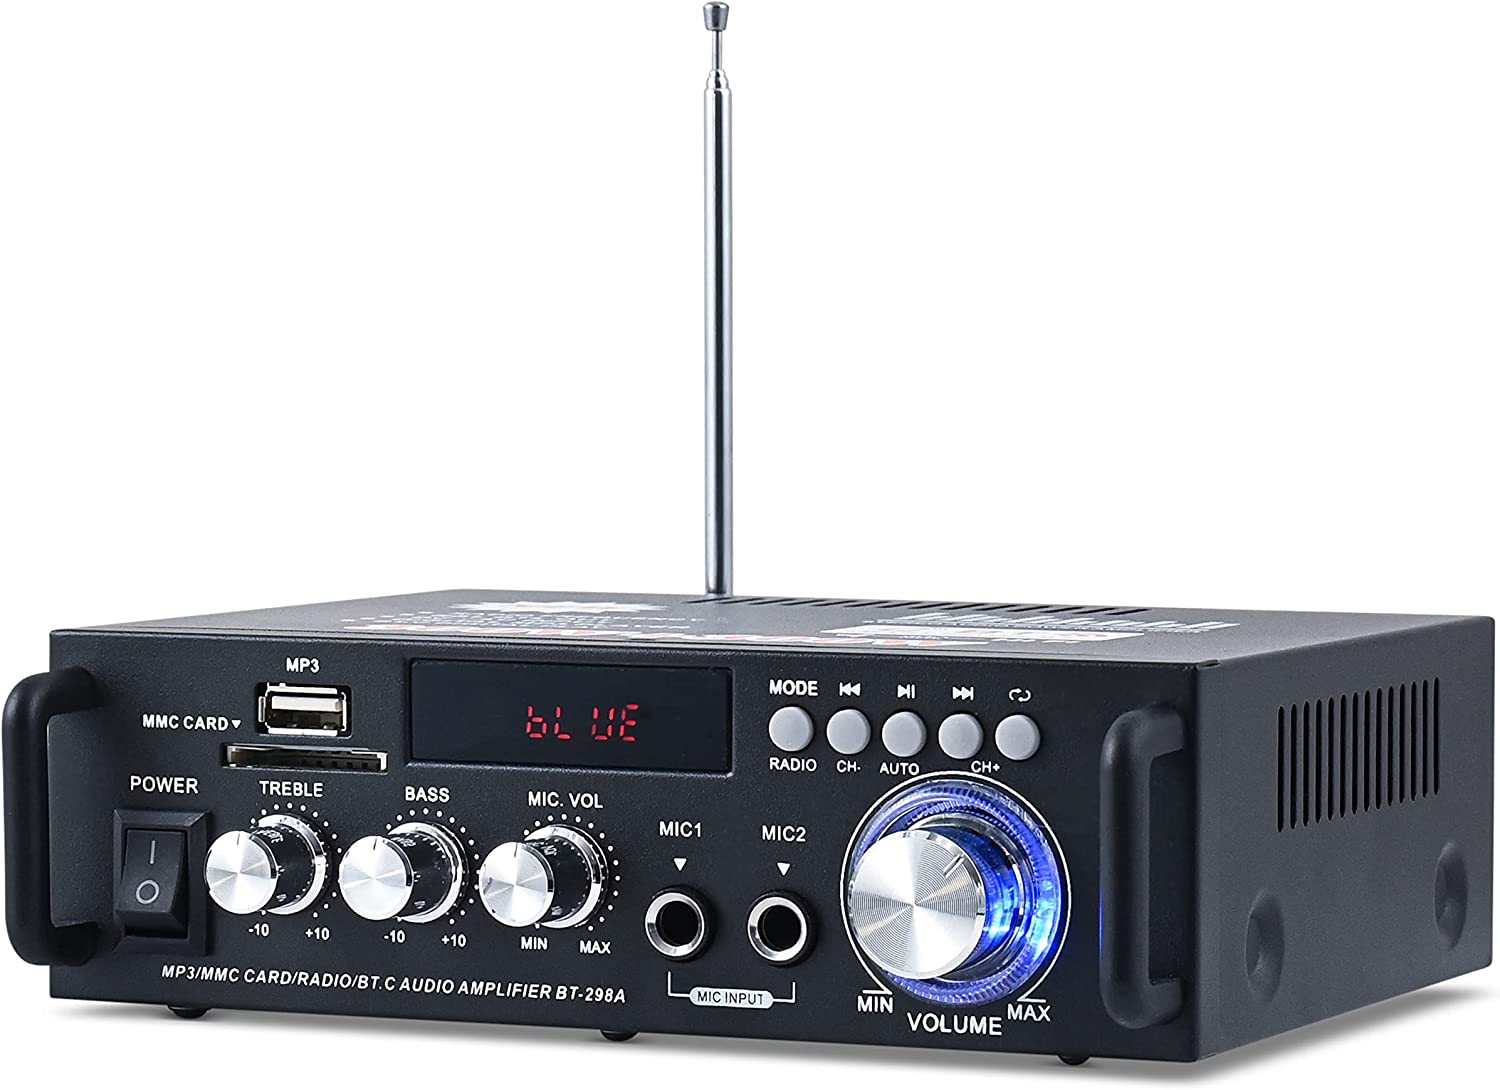 Kaynell 298A Wireless Stereo Amplifier